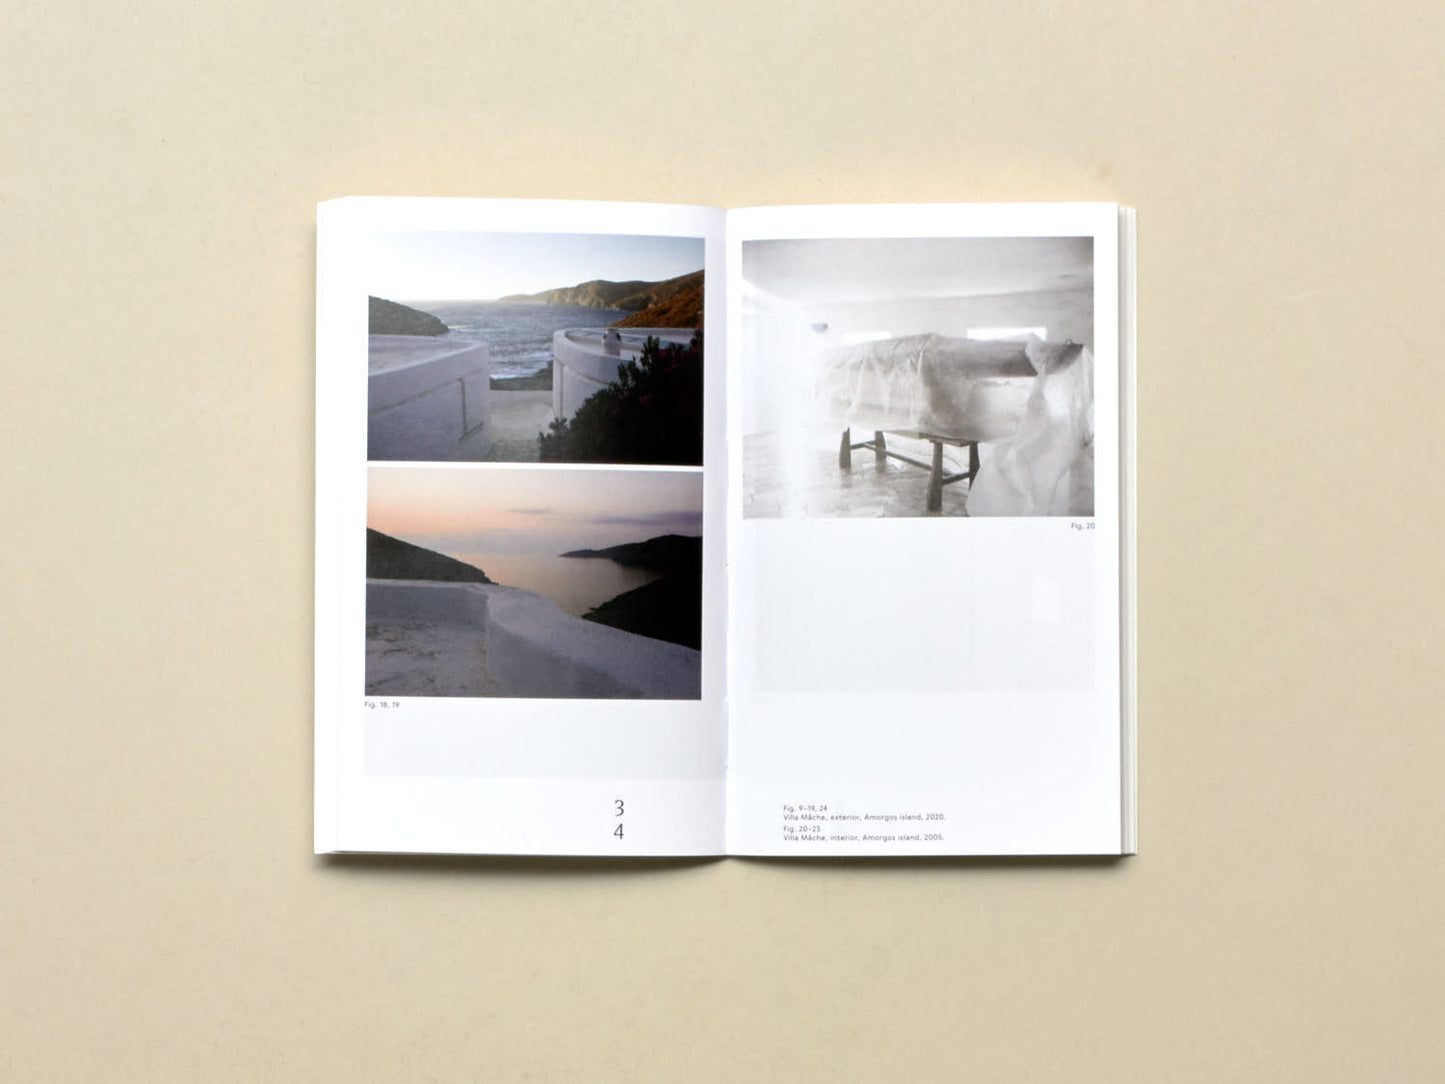 Dimitra Kondylatou, David Bergé (eds.), The Architect is Absent: Approaching the Cycladic Holiday House